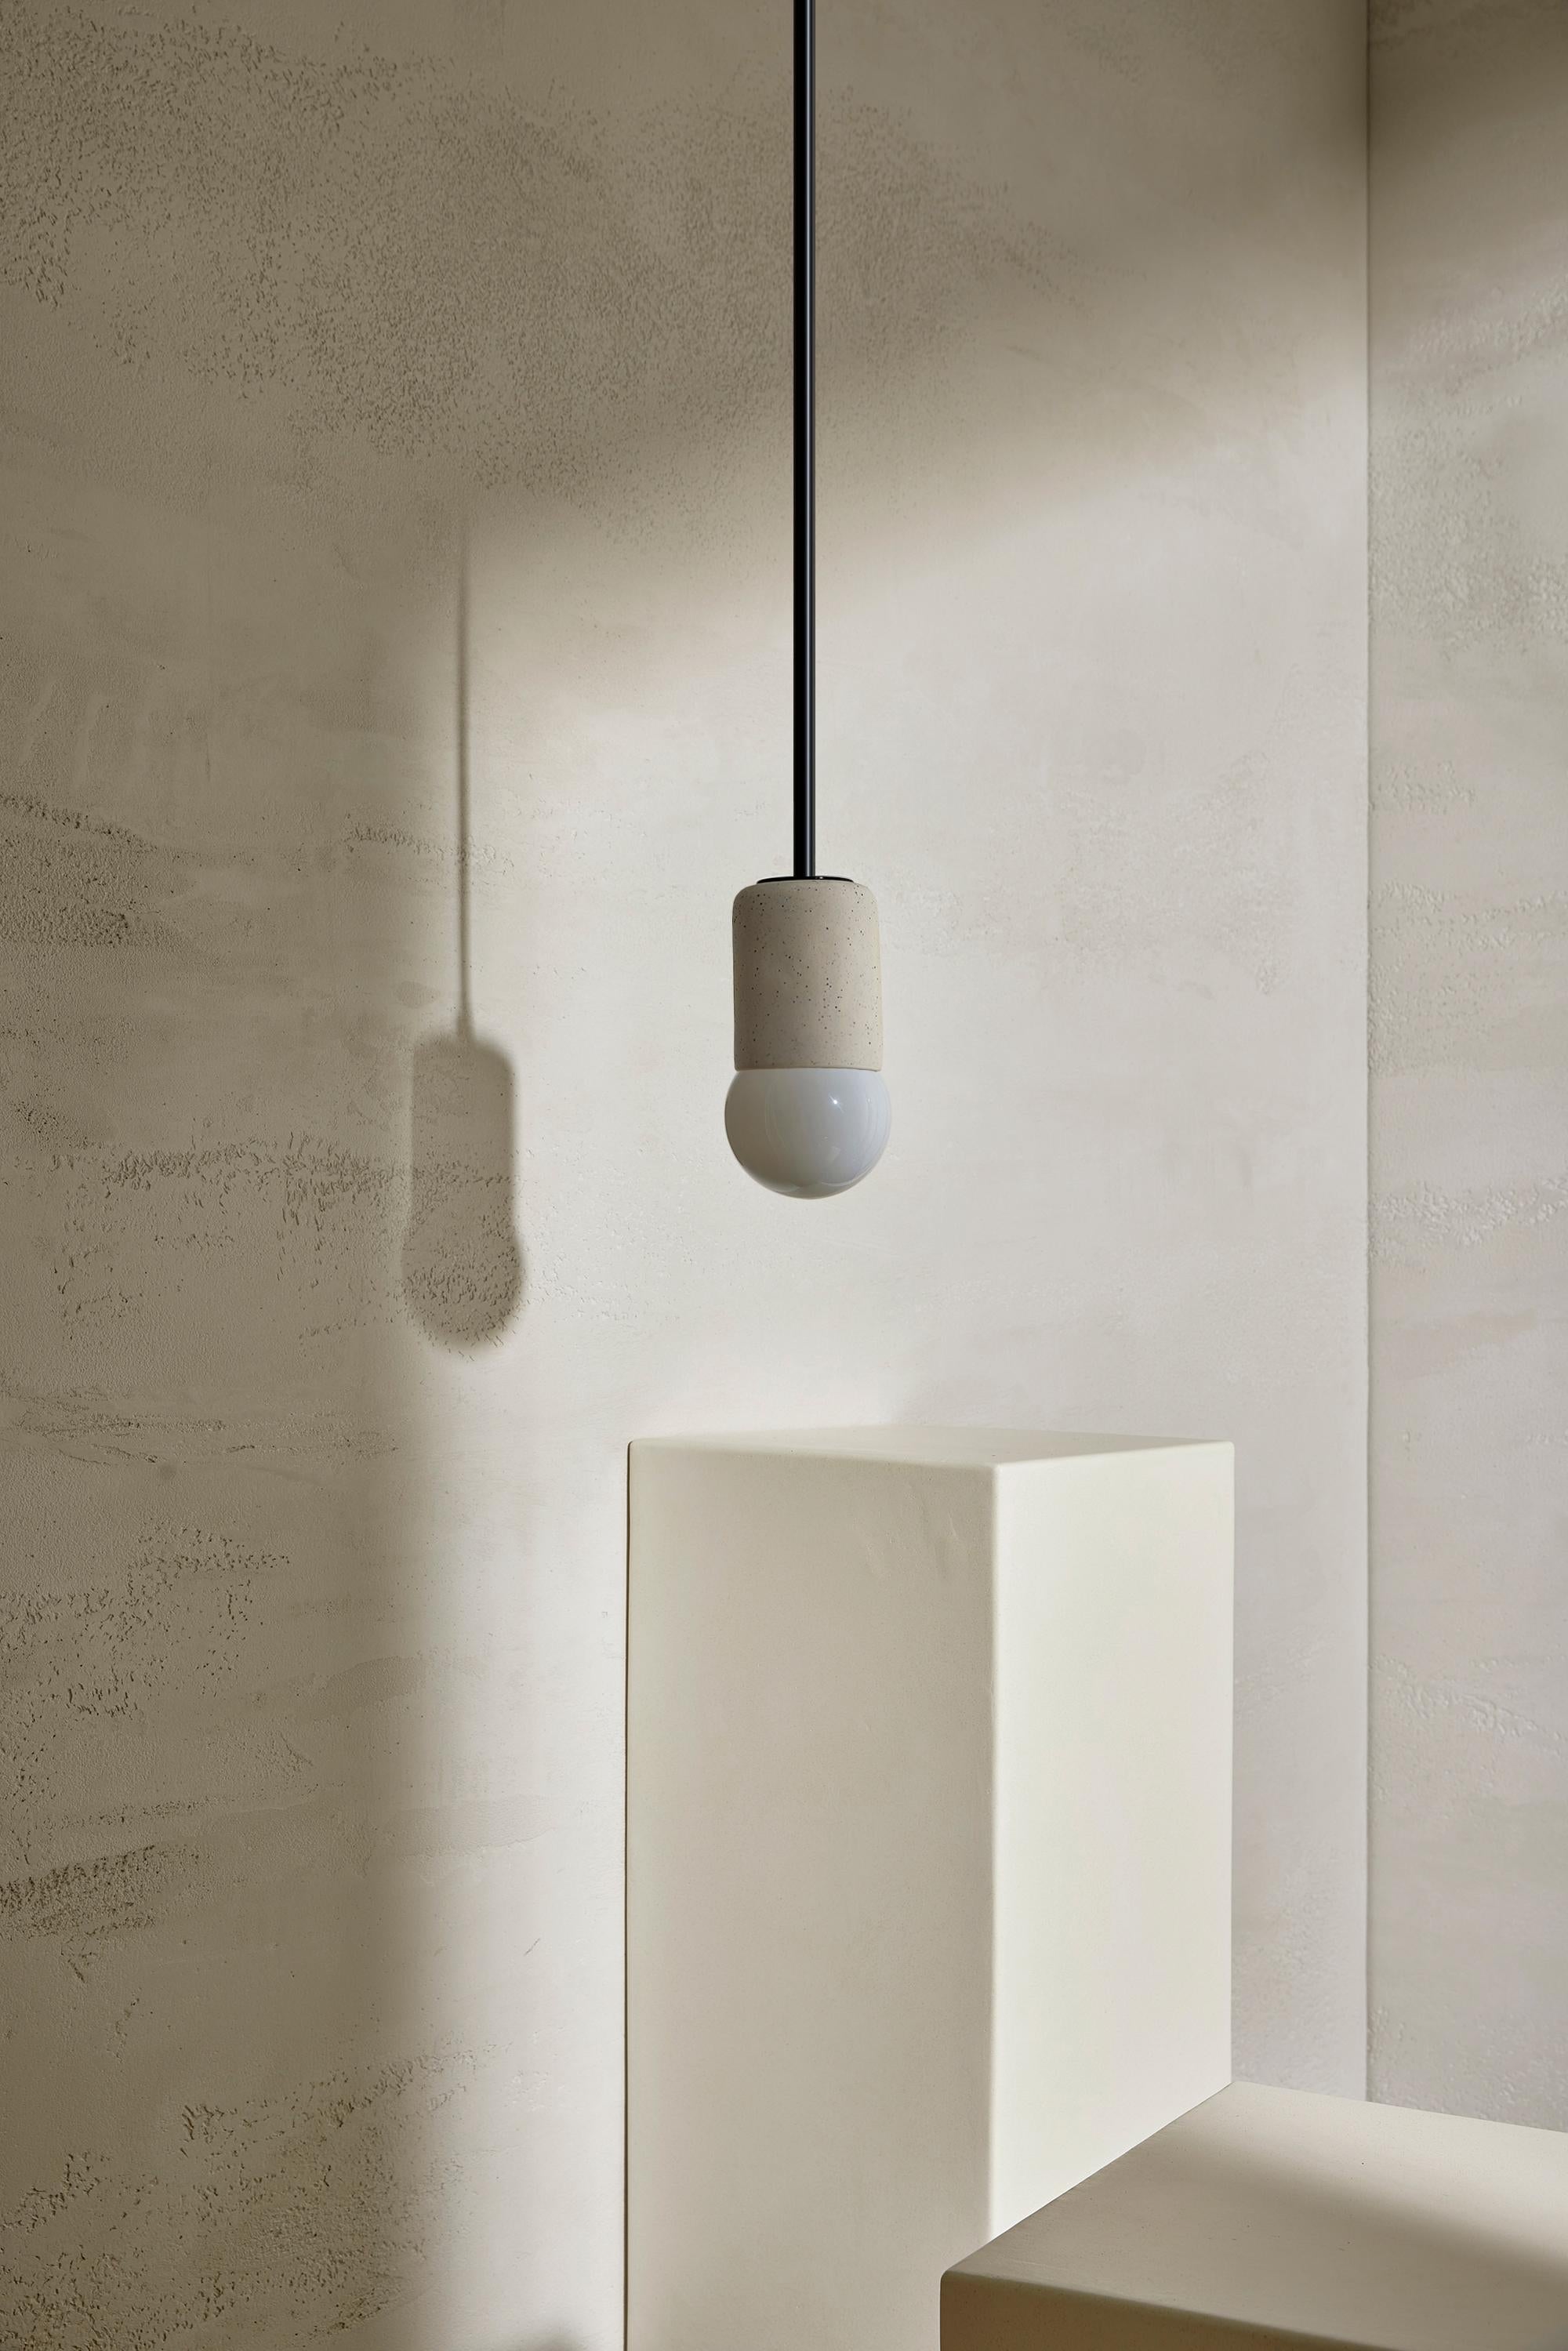 Simple cylindrical ceramic forms define the Terra 1 lighting range, which comes in pendant light, wall light, and in long and short articulating wall light formats. The Terra 1 Pendant Light is available in a choice of three tones – Slate, Sage and